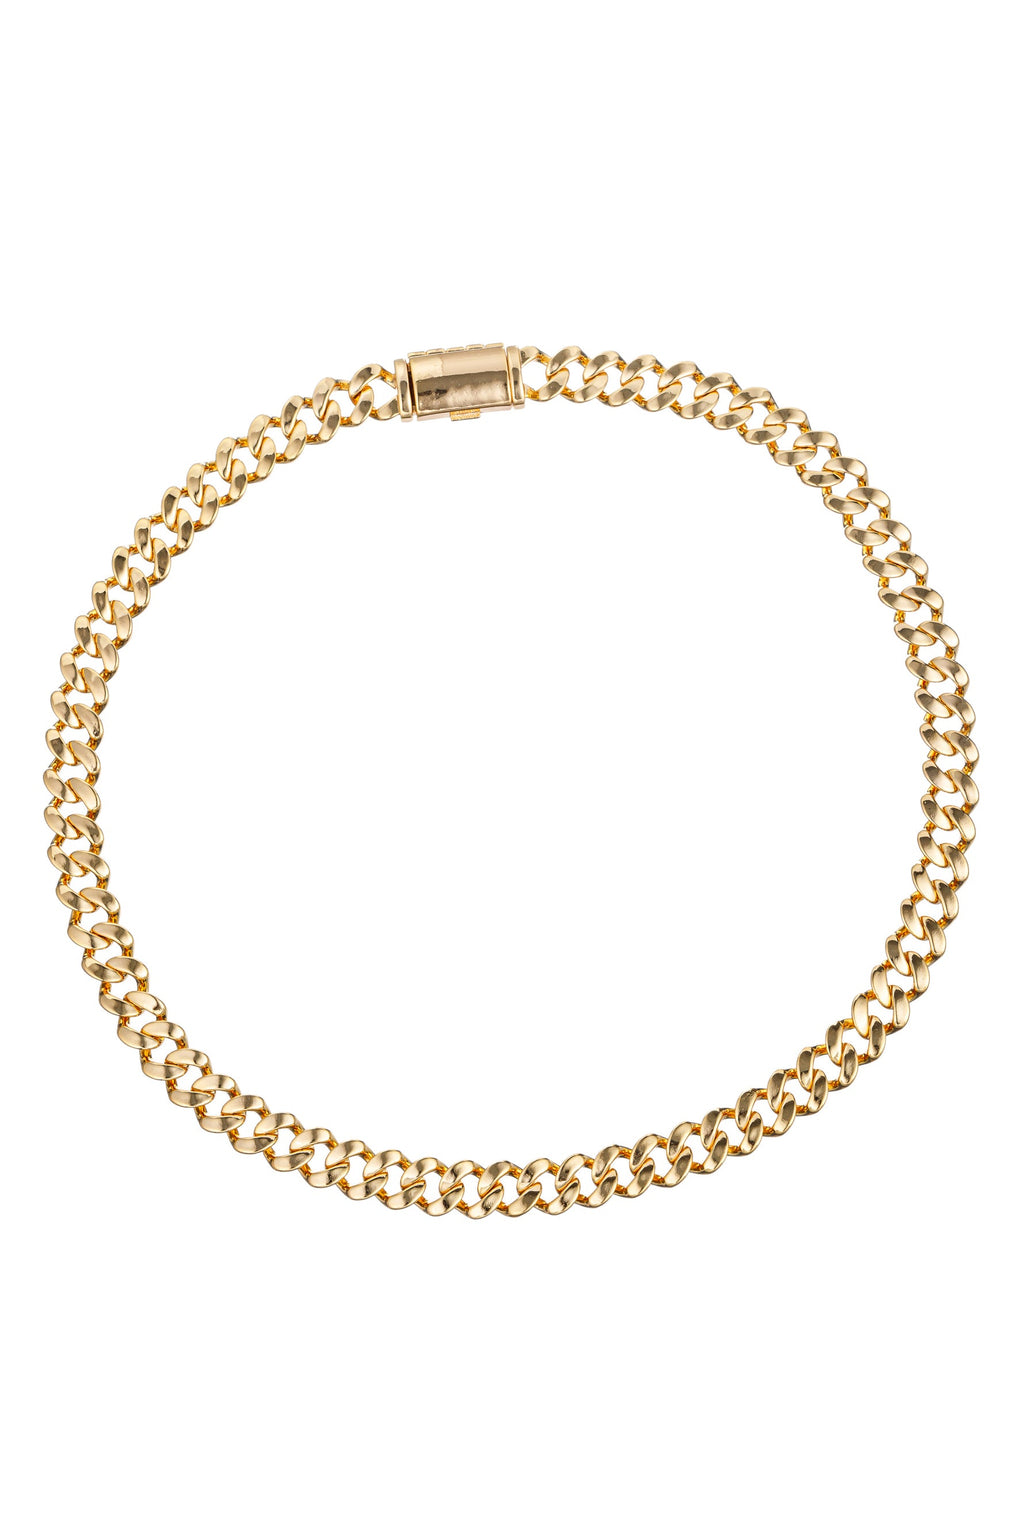 Make a Bold Statement with the Fabien Cuban Link Necklace.